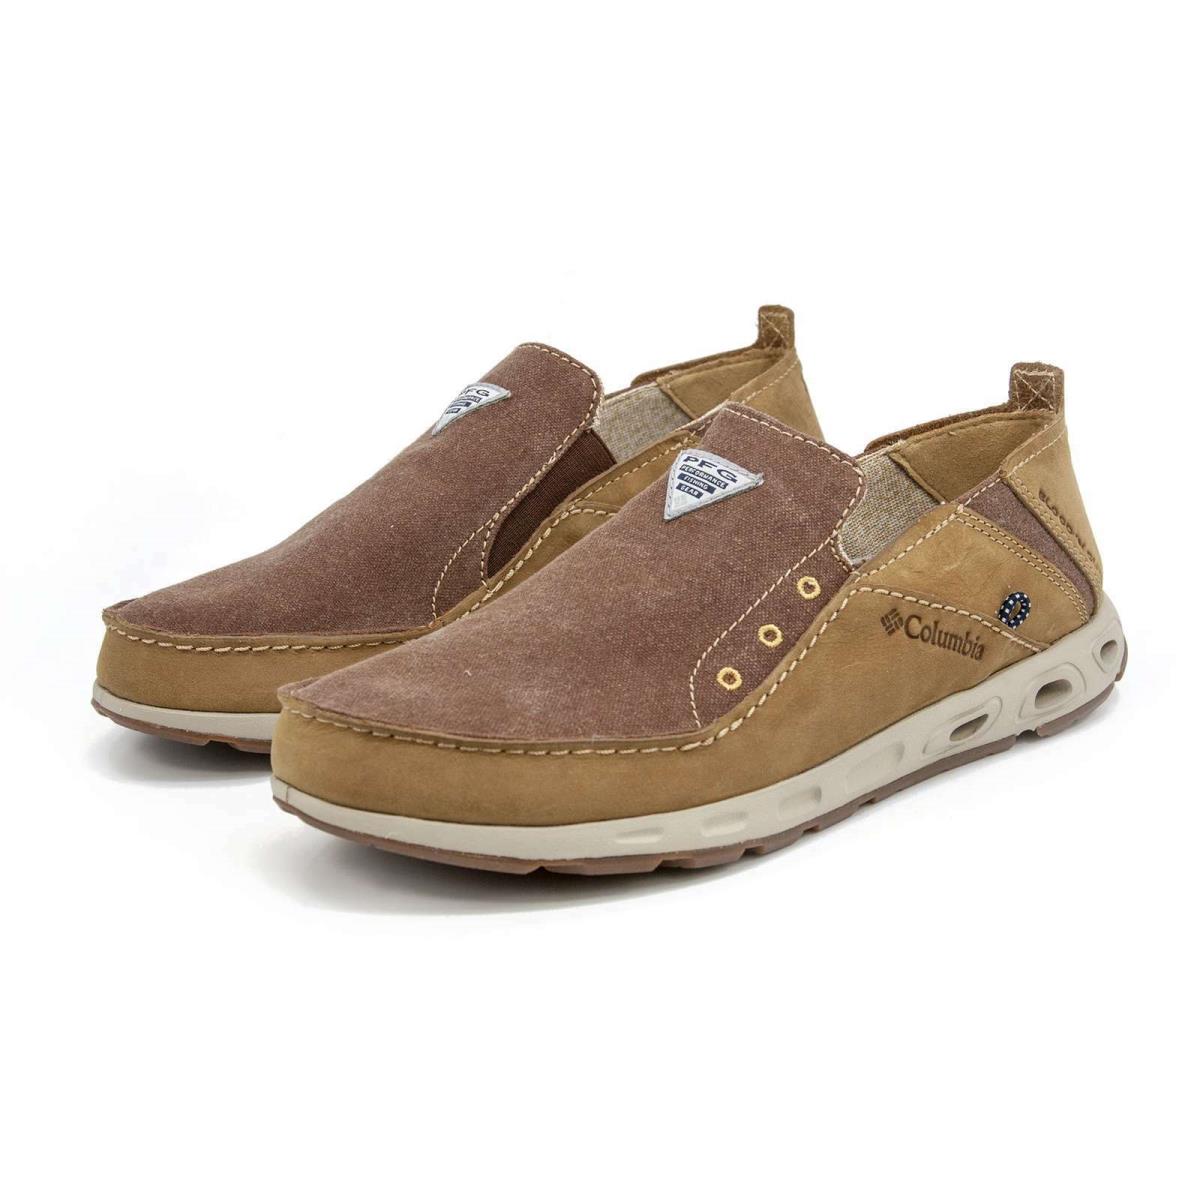 Columbia Men`s Bahama Pfg Series Water Boat Shoes Wide Width Slip On Shoes Elk / Curry